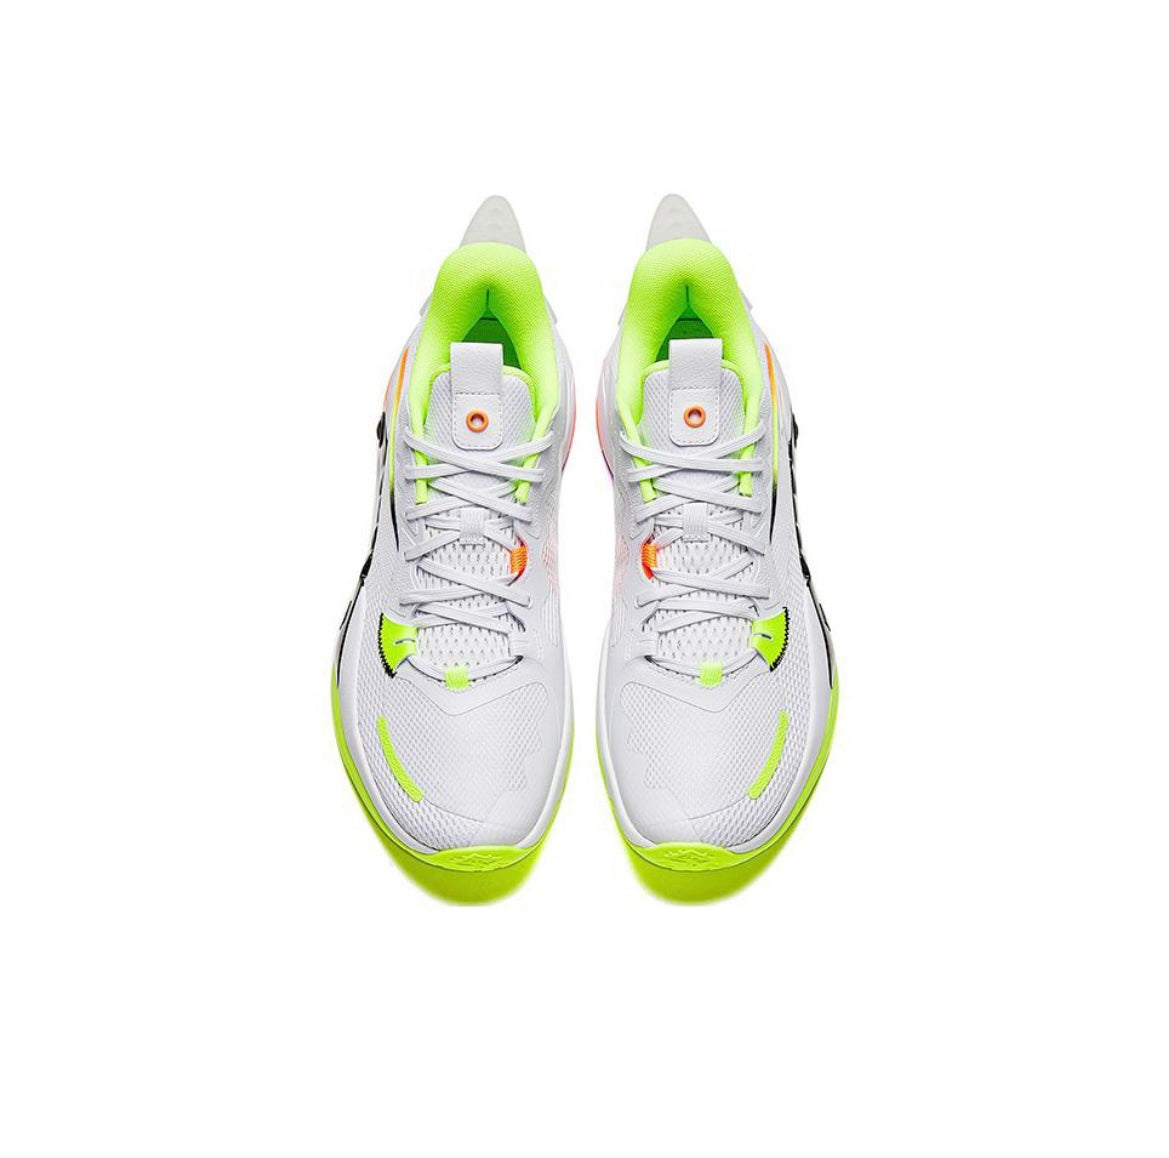 Kyrie Irving x Anta Shock Wave 5 TD - White/Green